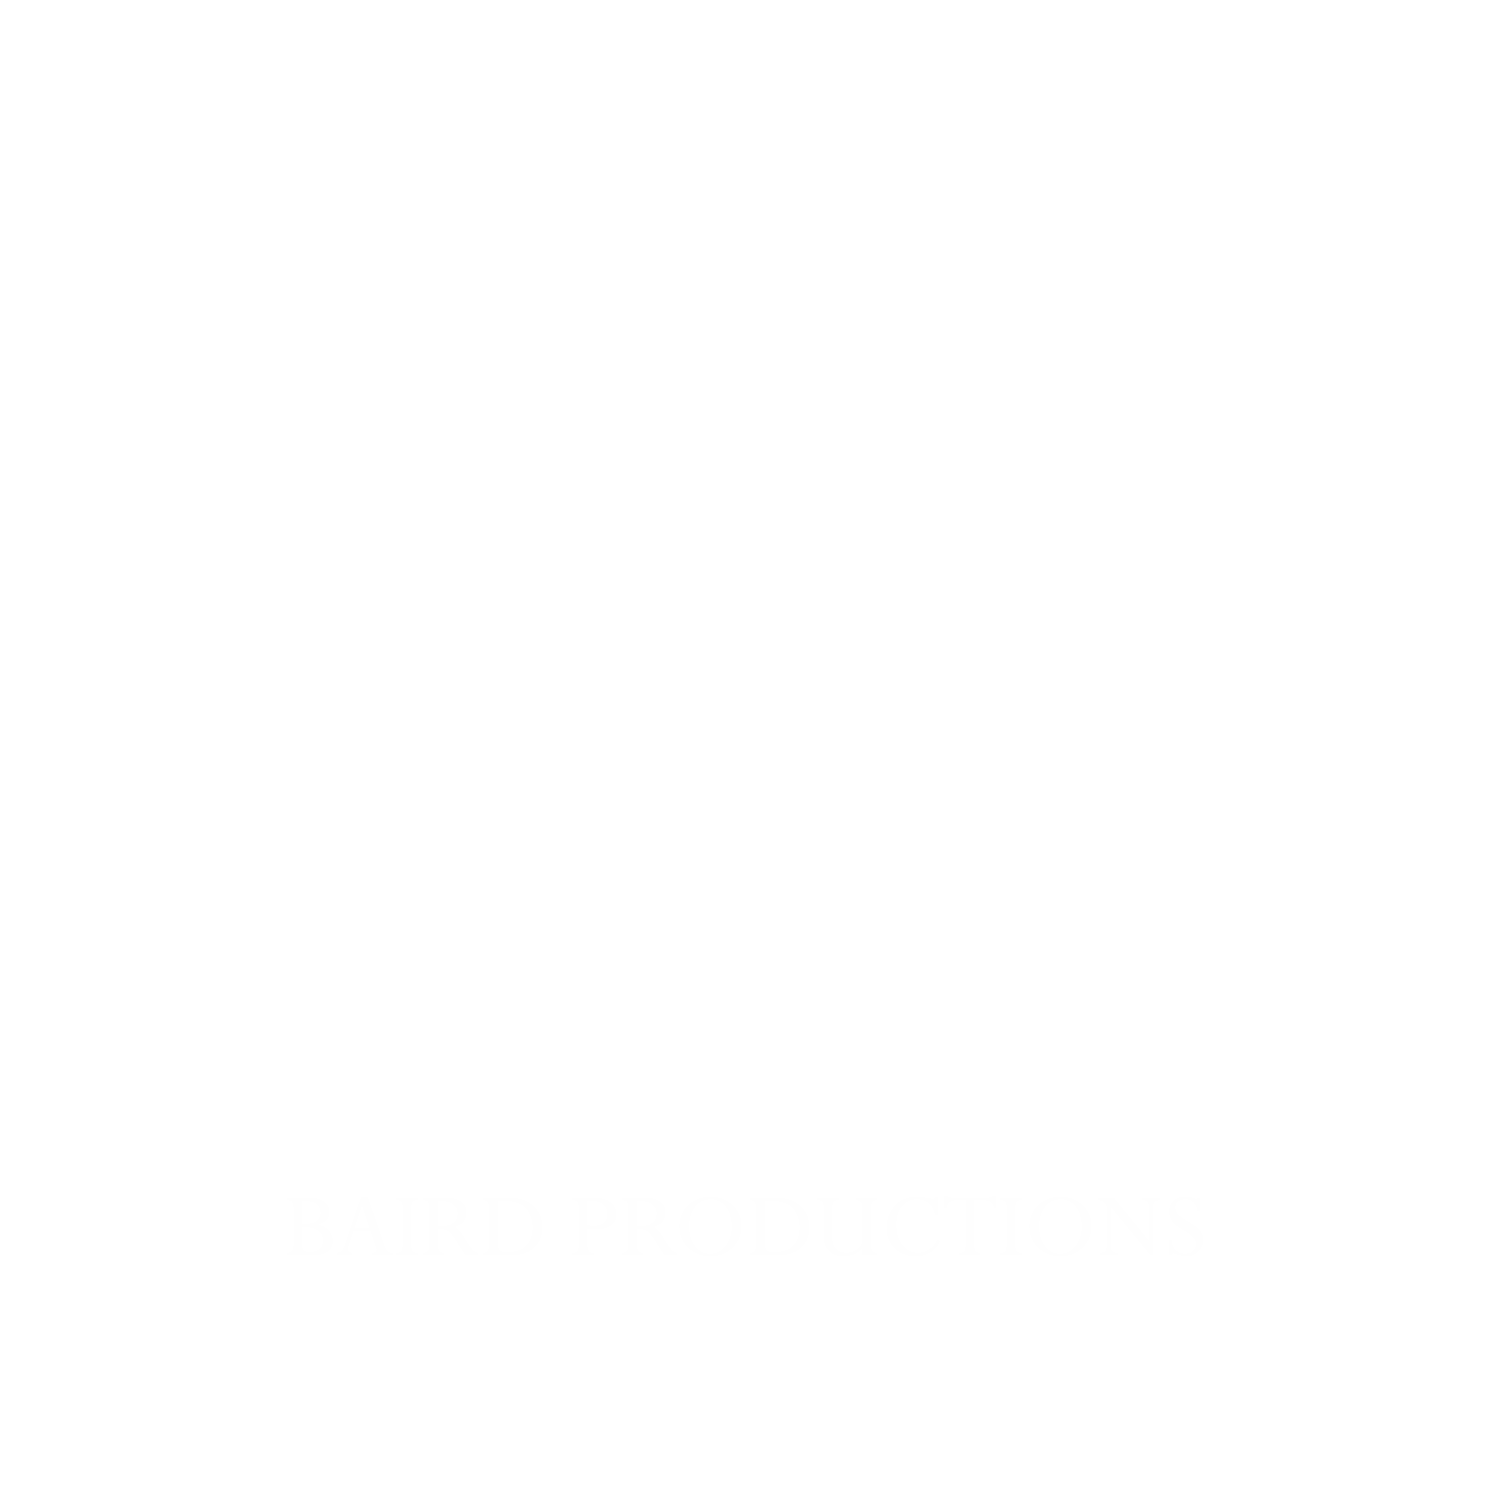 Baird Productions